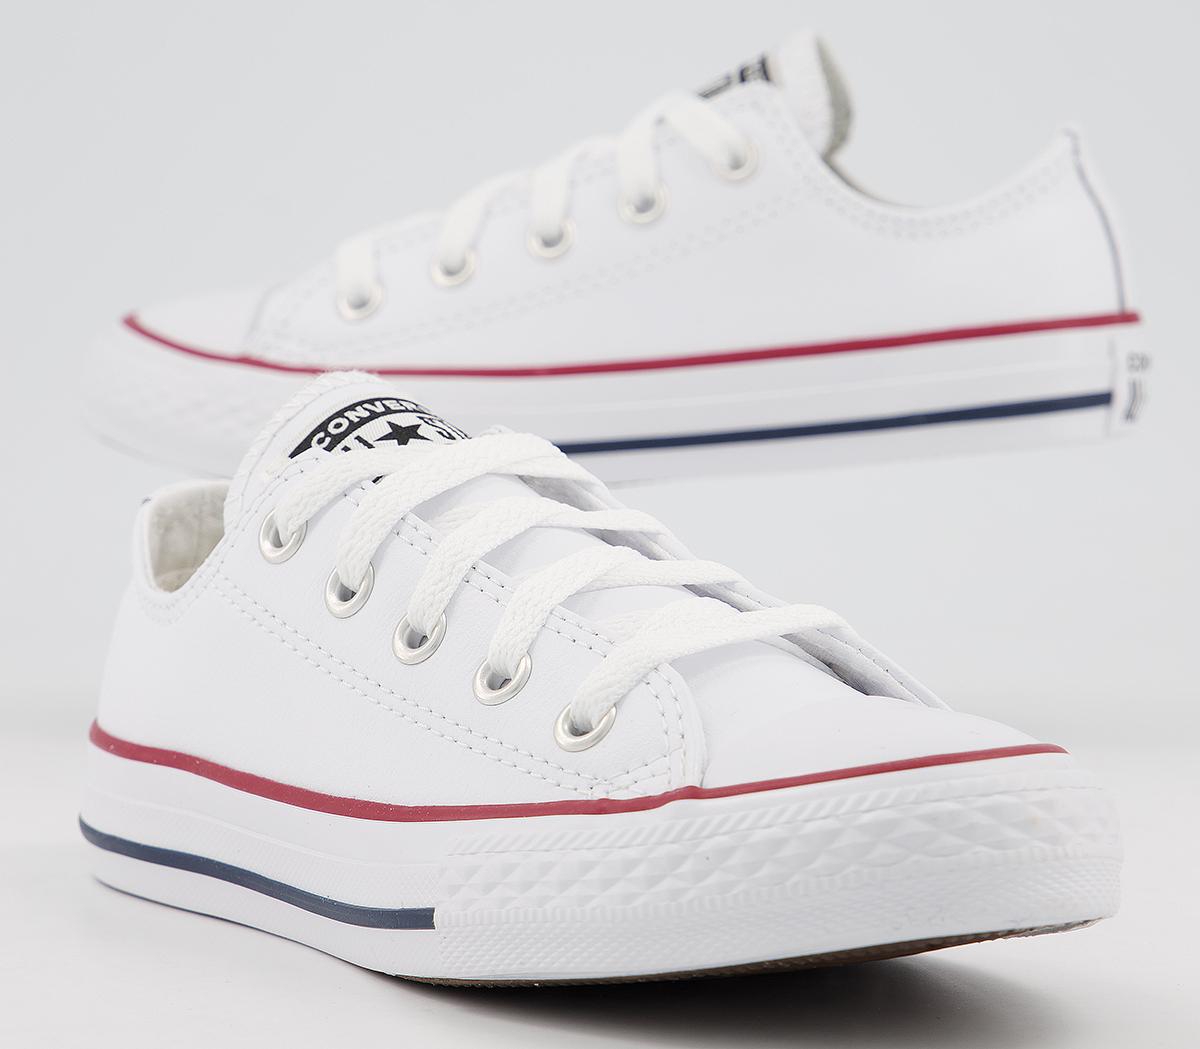 Converse All Star Low Youth Trainers Optical White Leather - Unisex